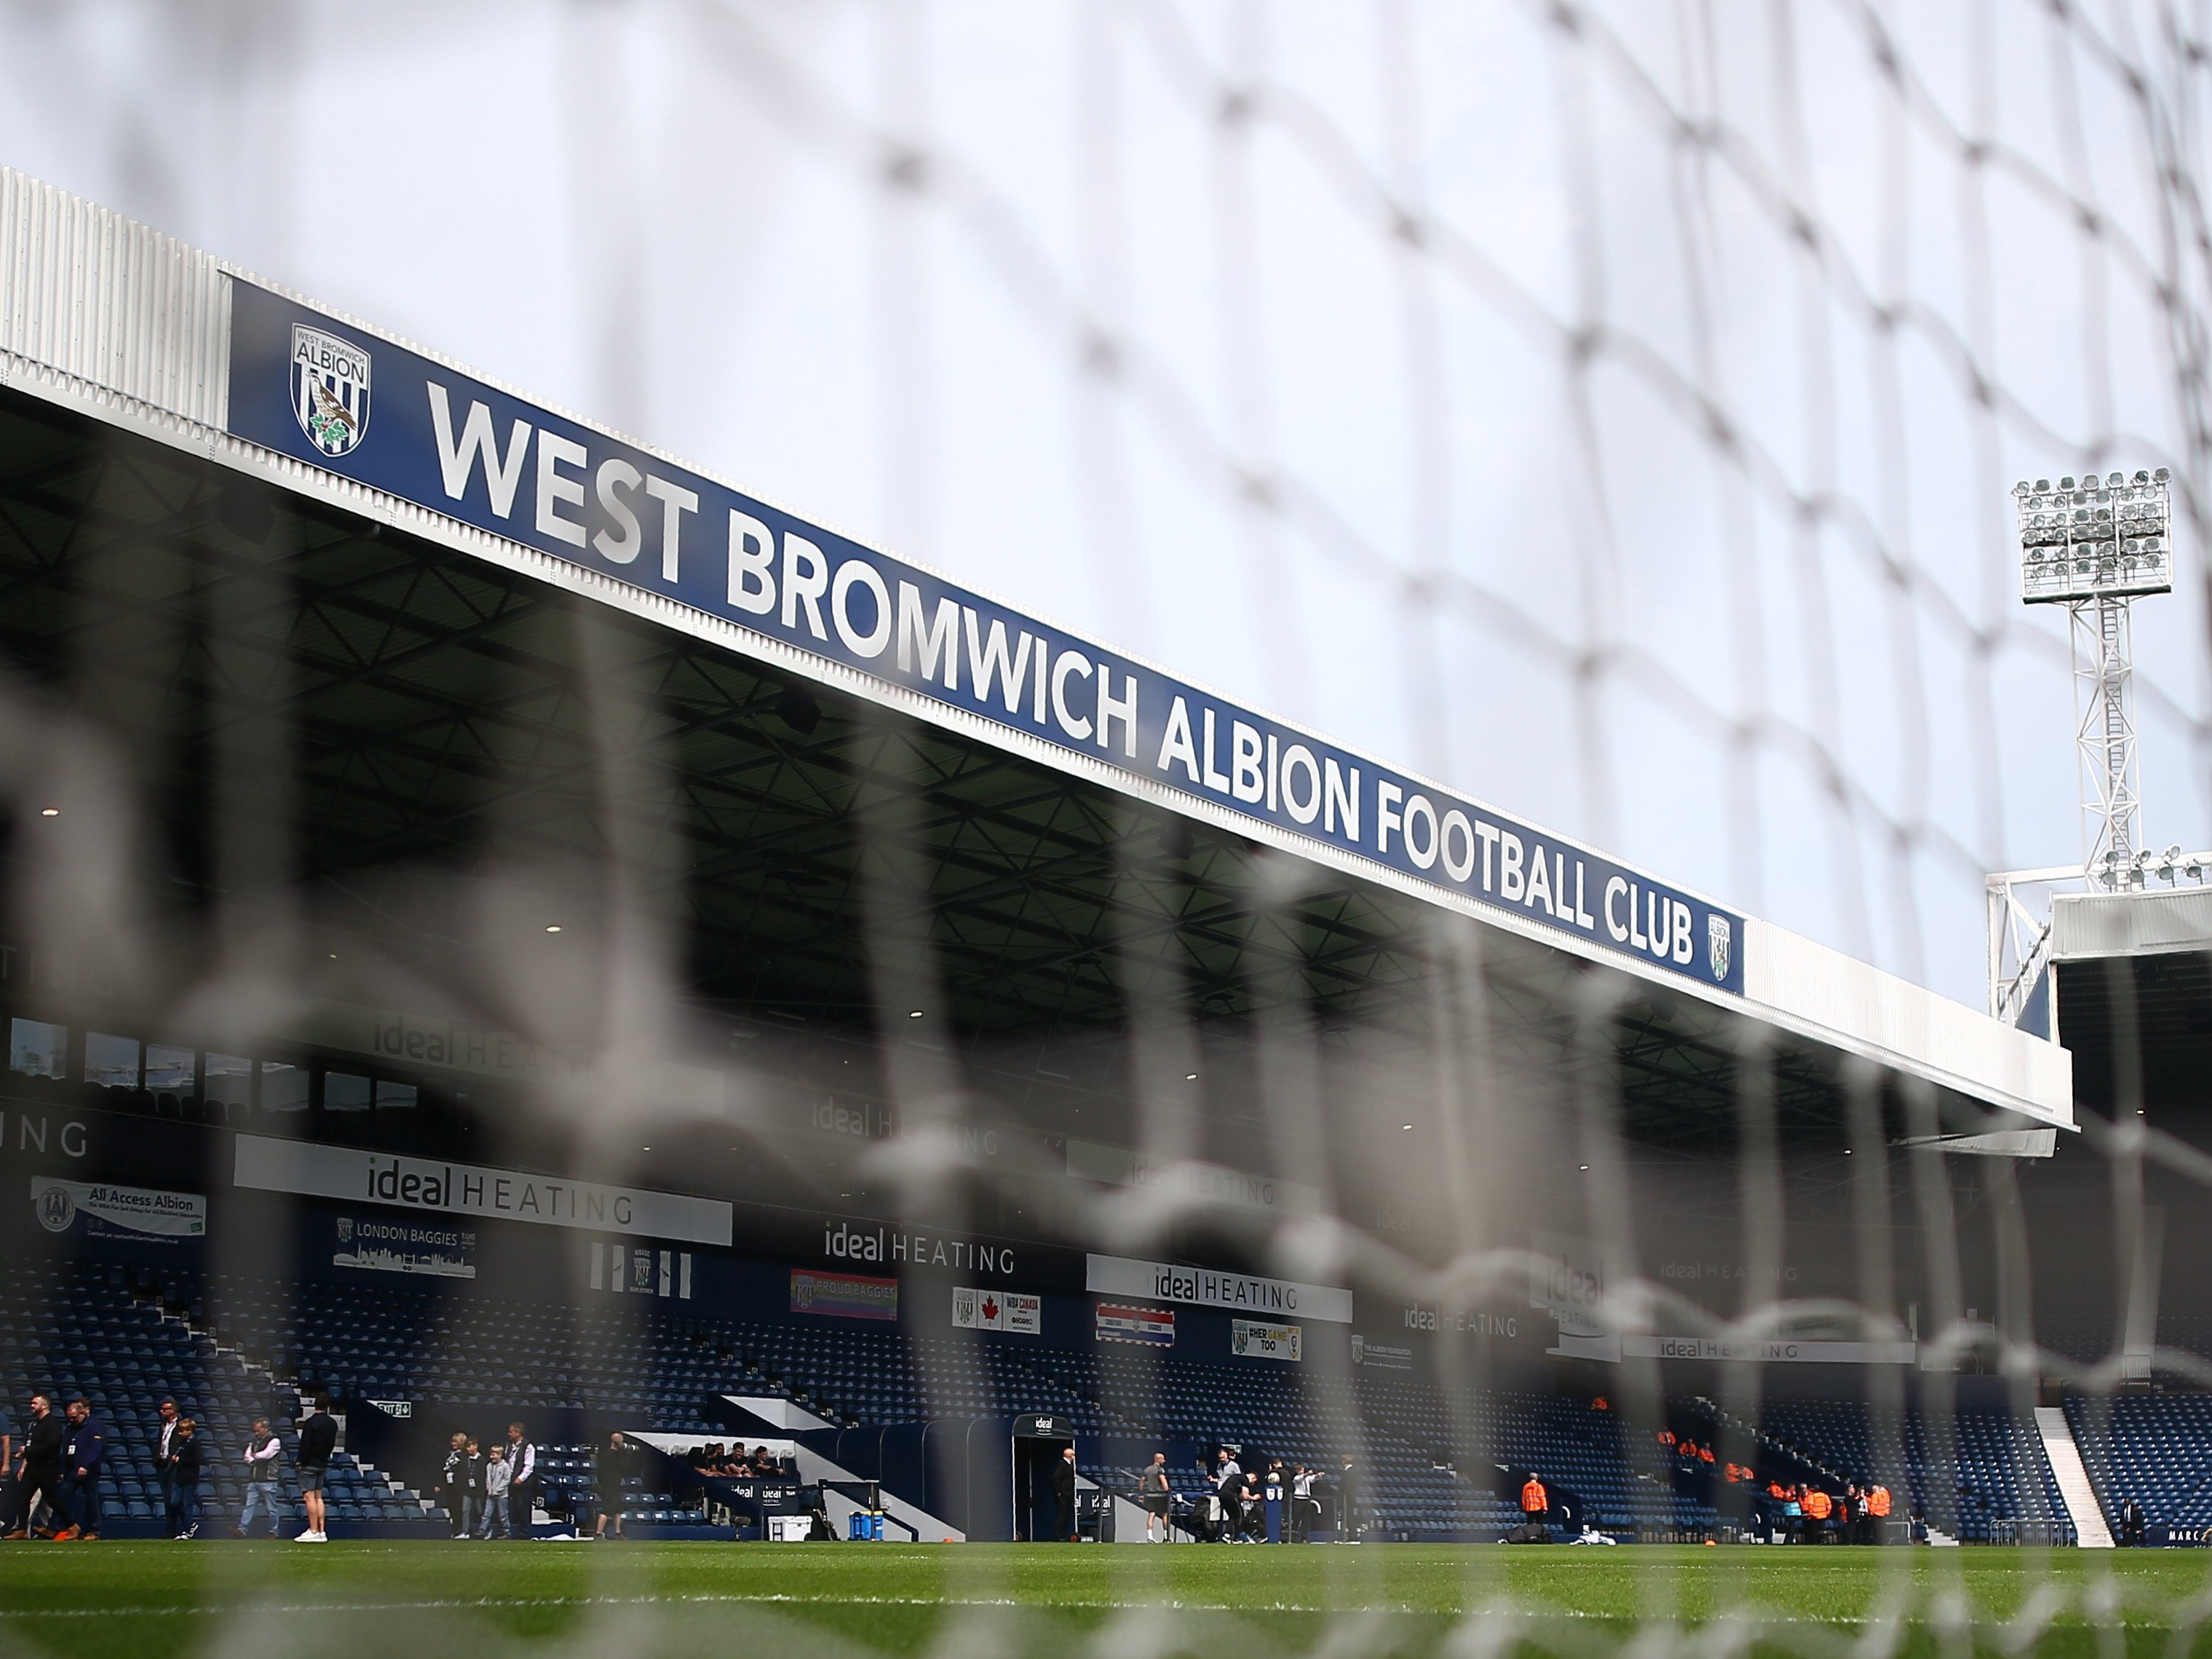 A general view of the West Stand at The Hawthorns through the goal net